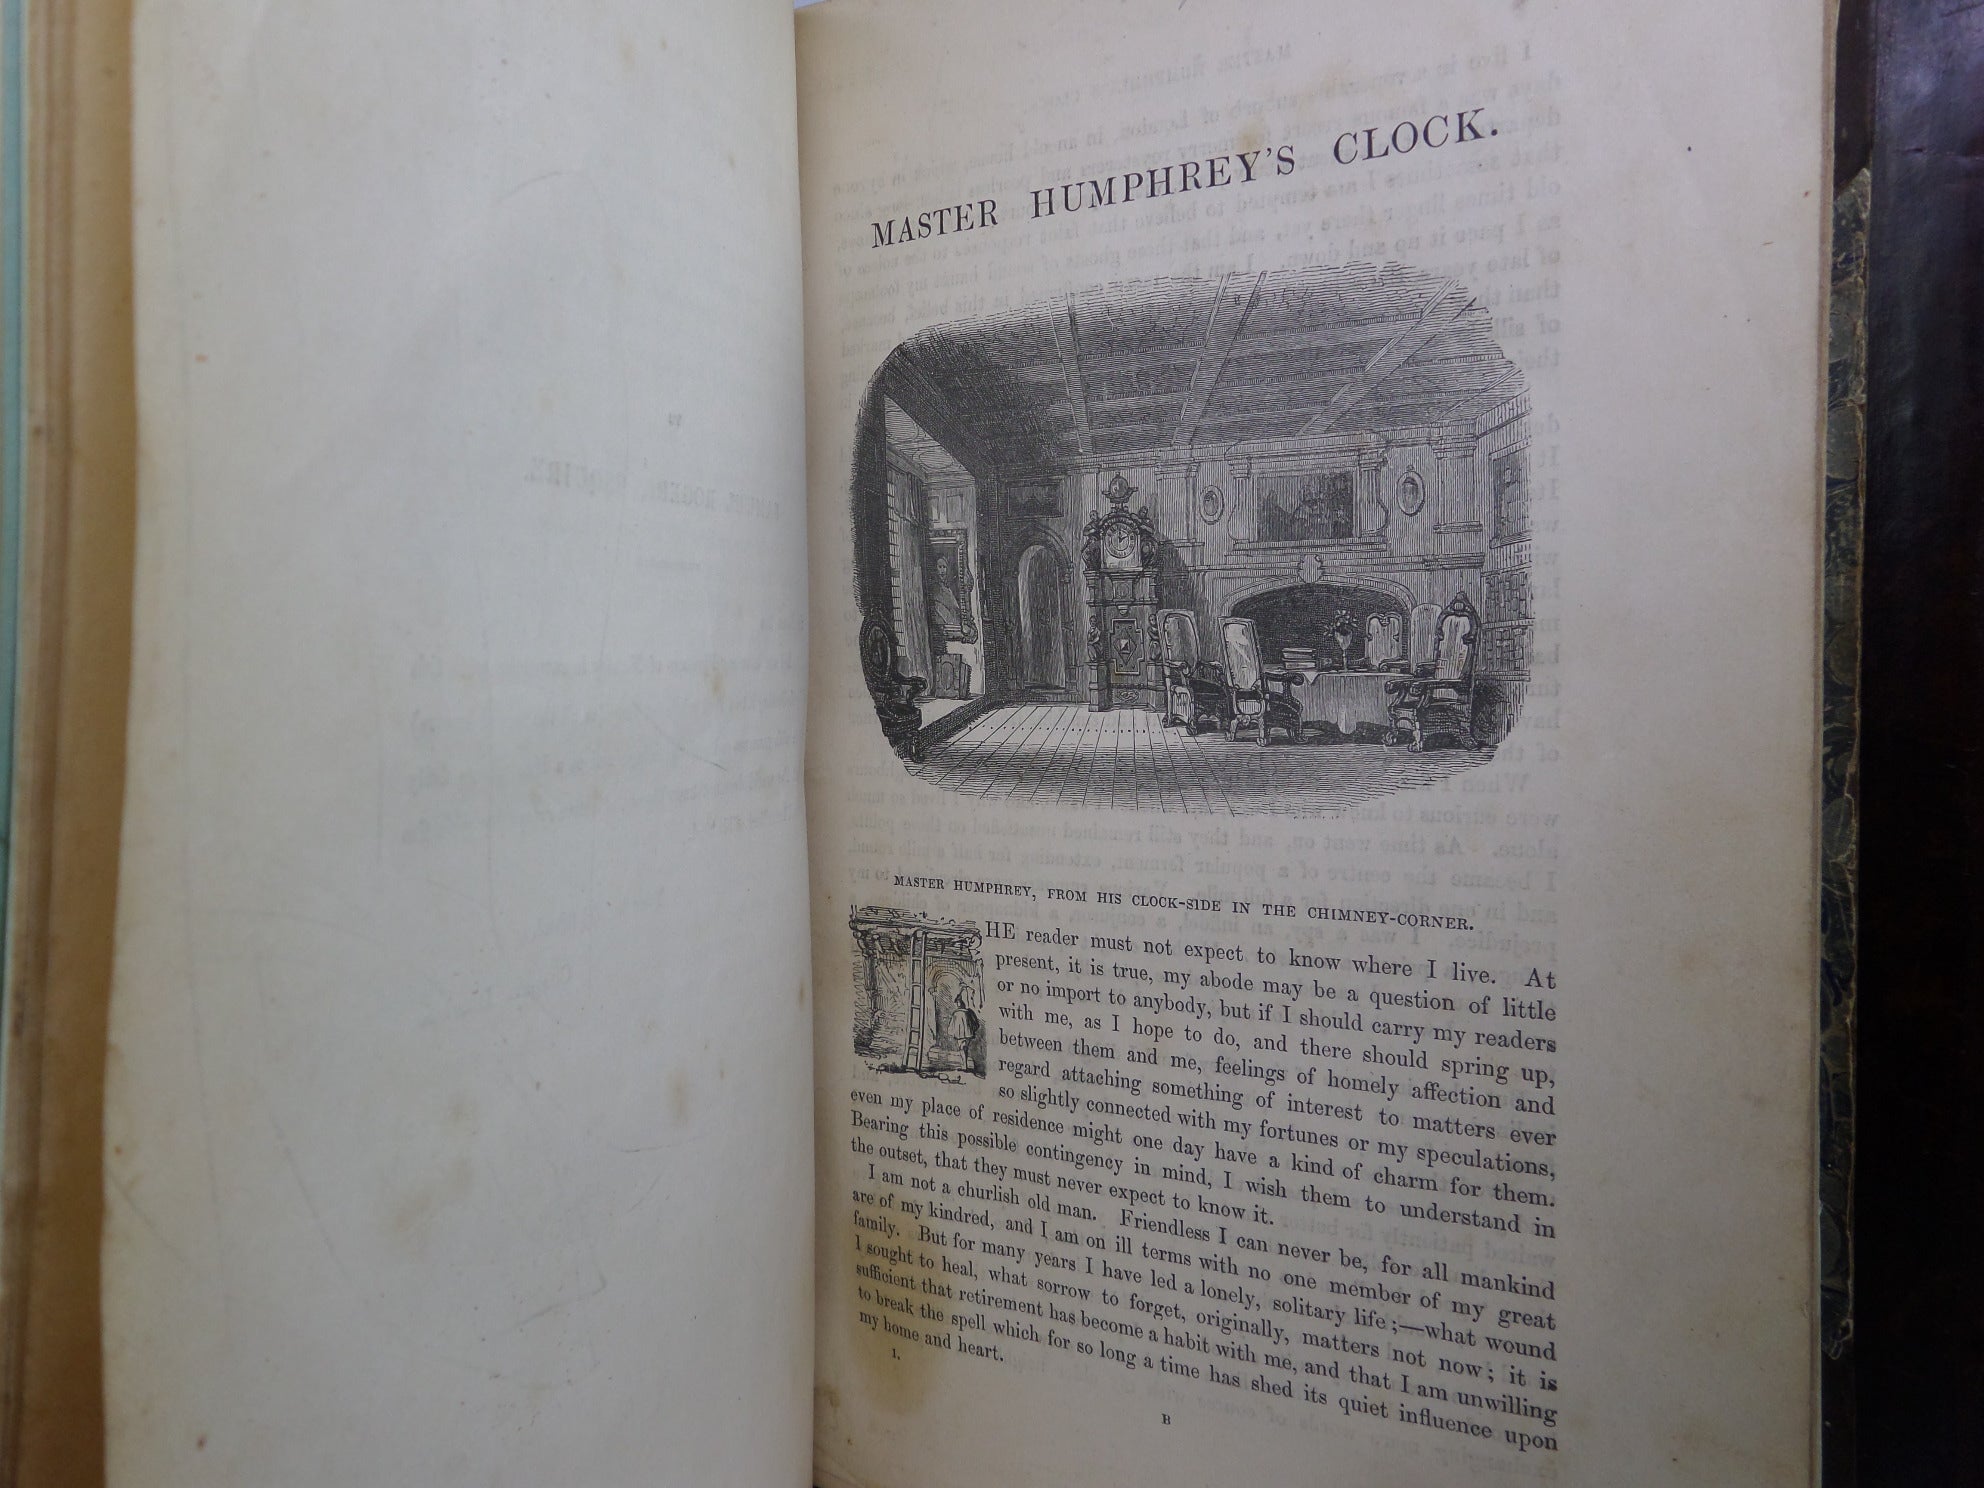 MASTER HUMPHREY'S CLOCK BY CHARLES DICKENS 1840-41 FIRST EDITION LEATHER BOUND